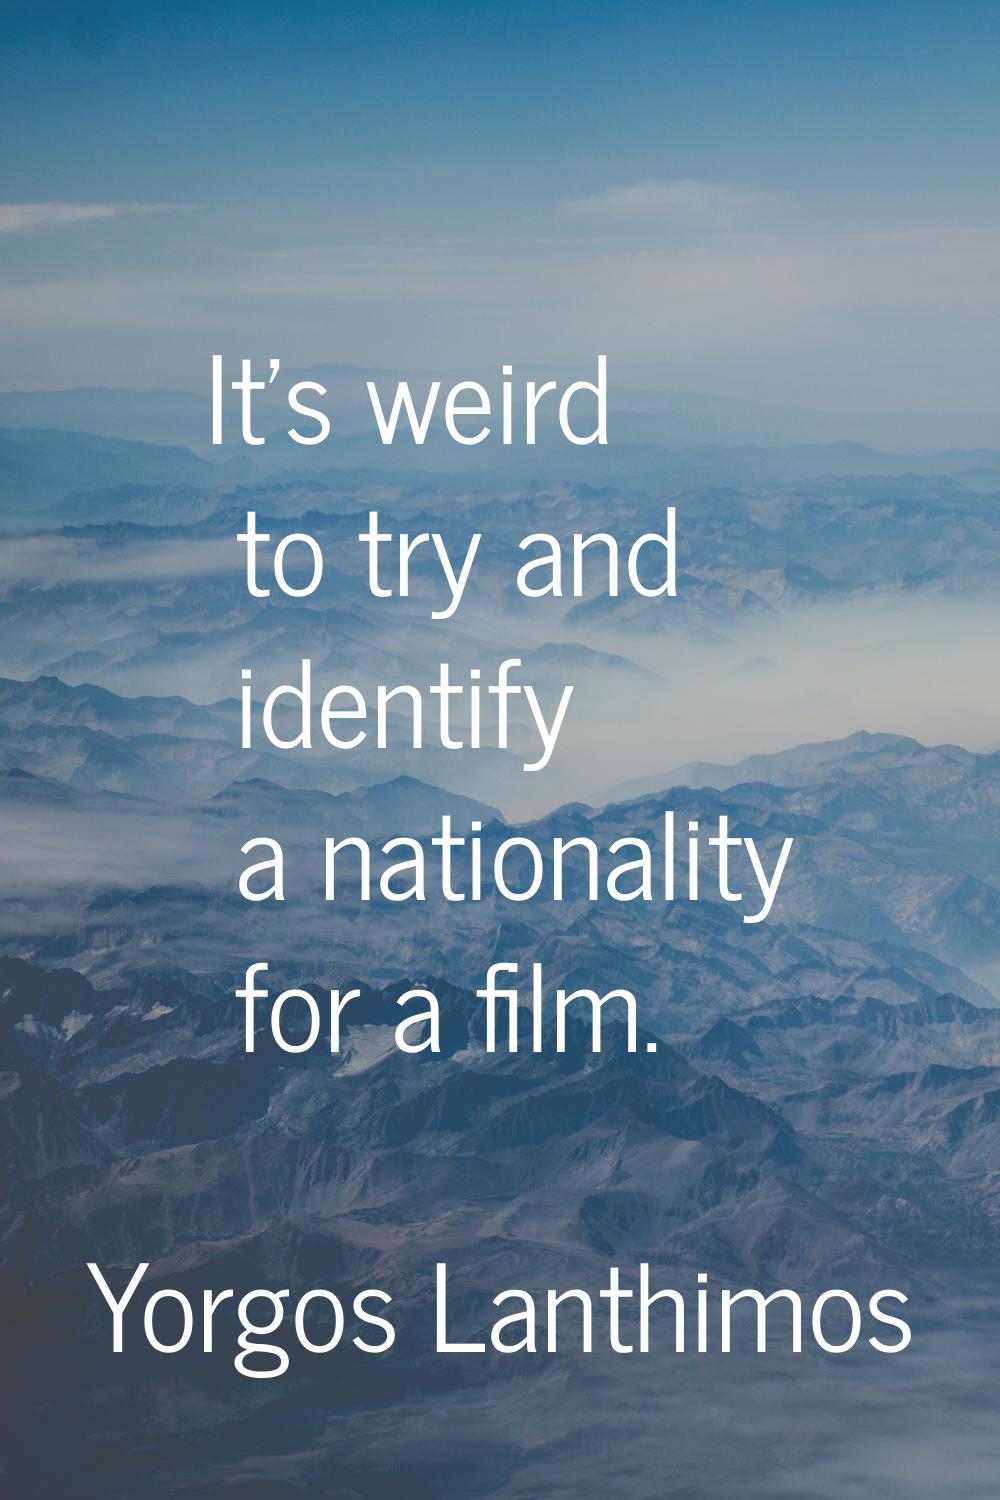 It's weird to try and identify a nationality for a film.